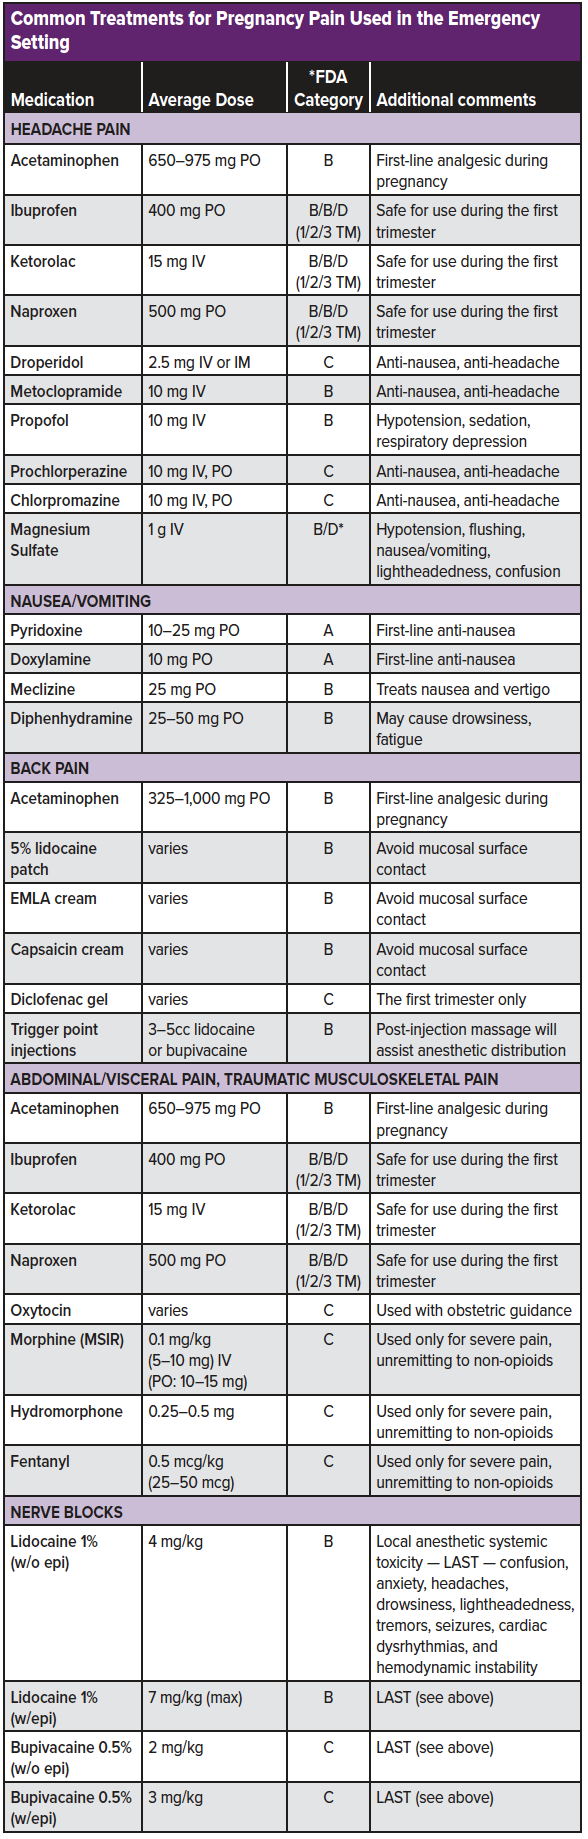 14 - Pain in Pregnancy - Common Treatments.png